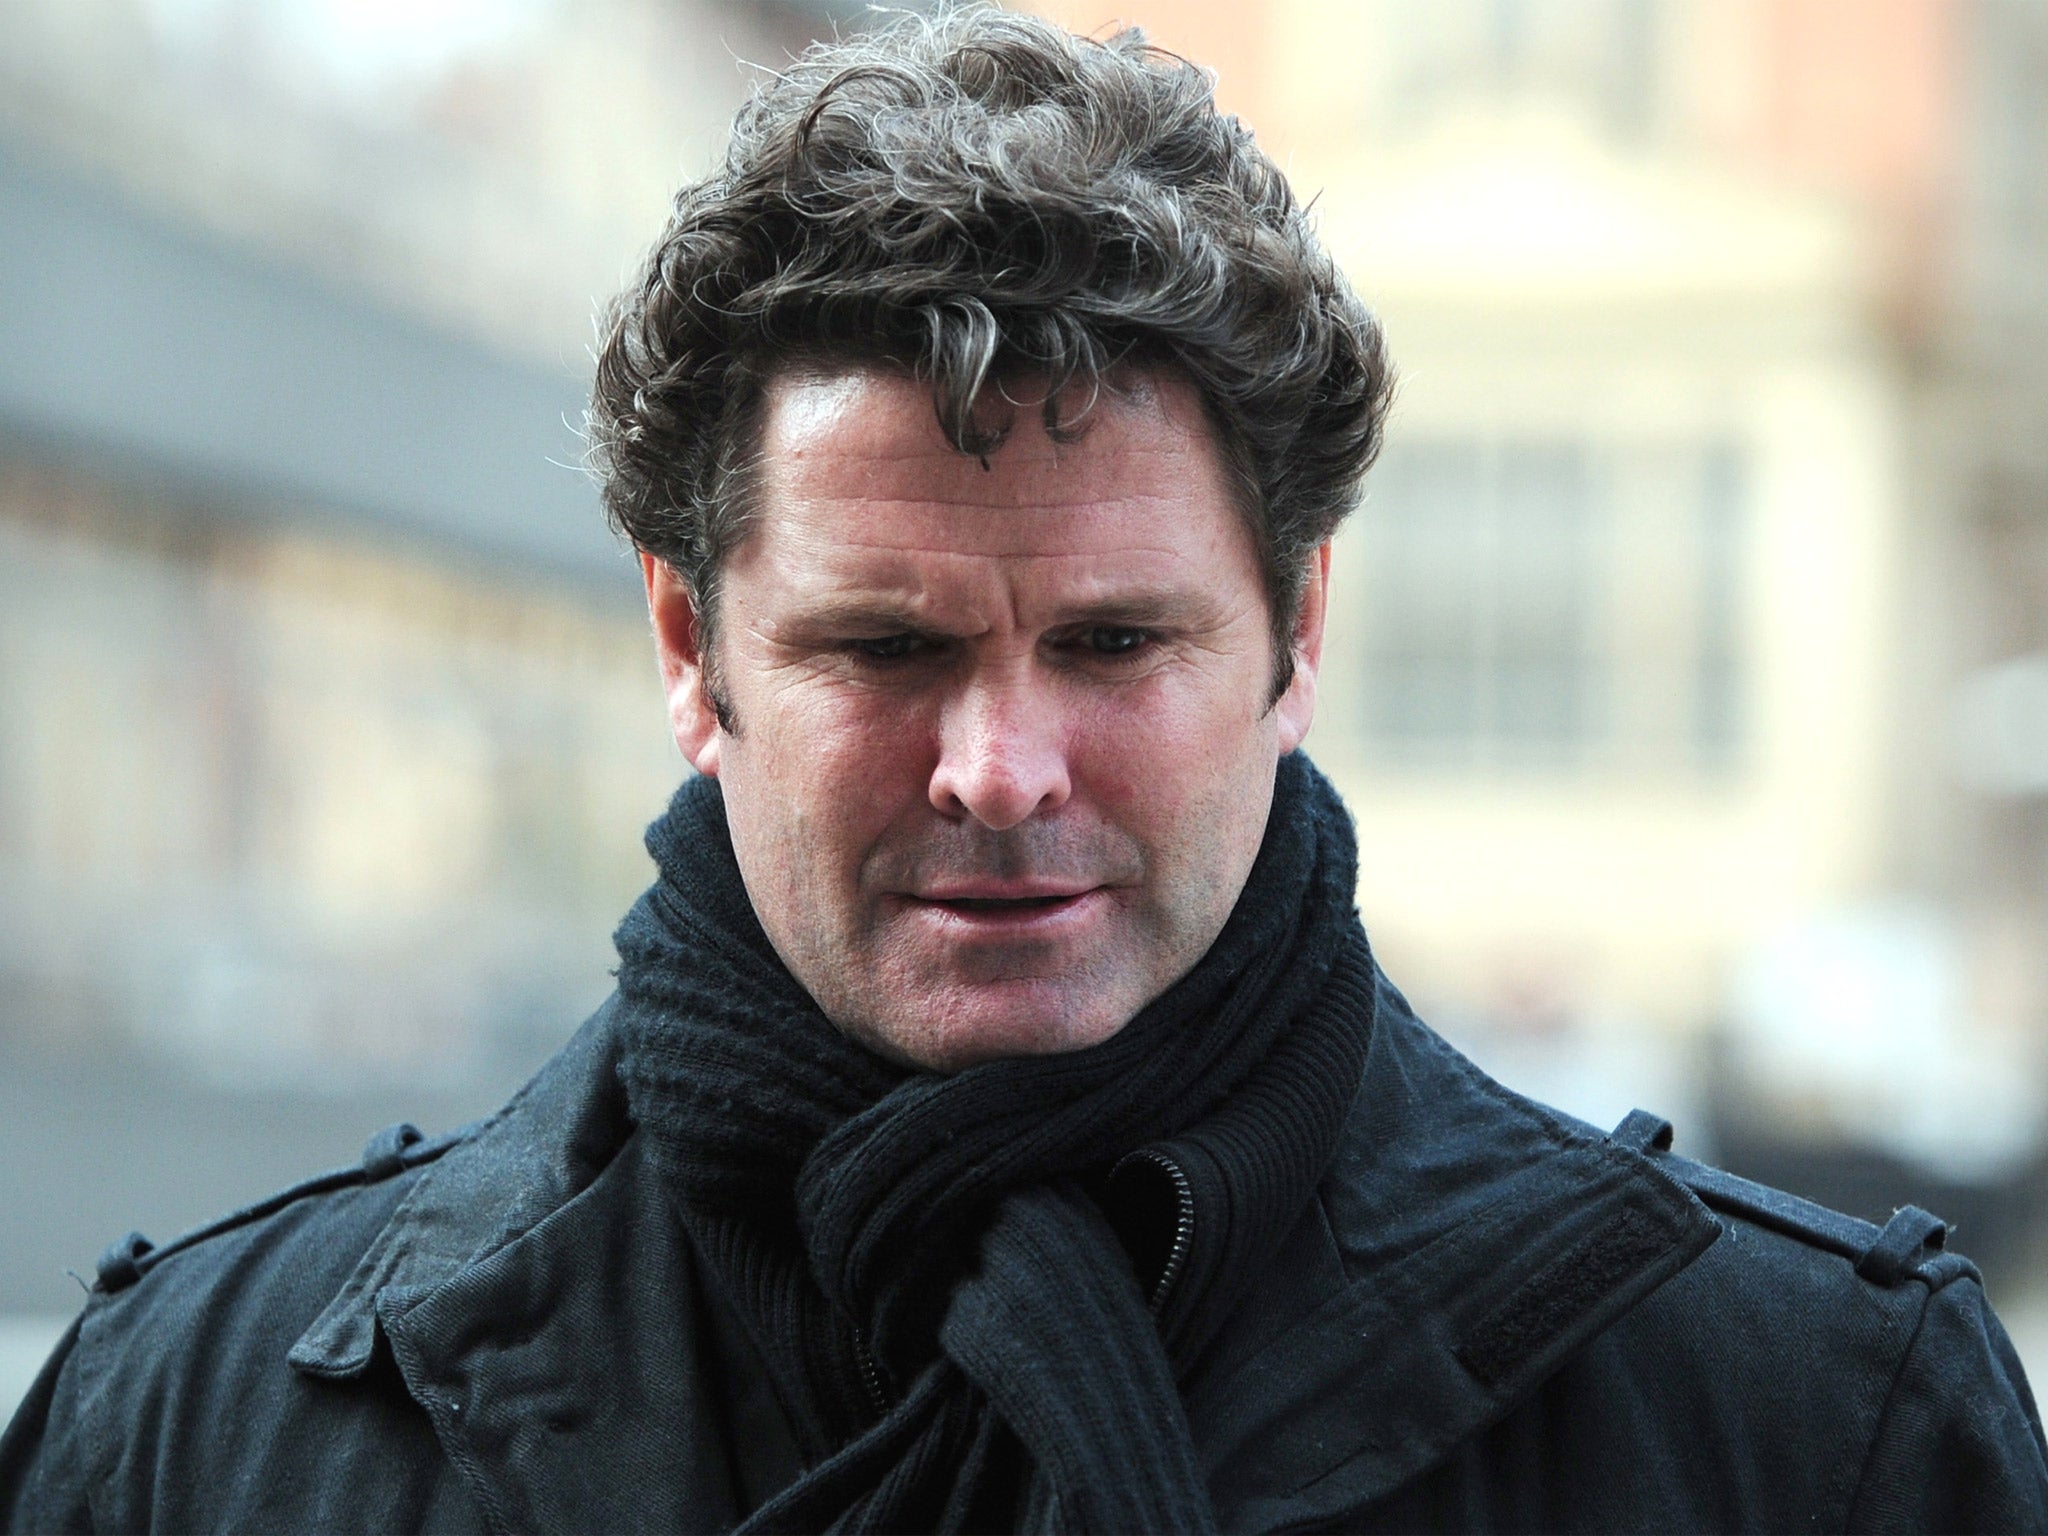 Chris Cairns has been linked to match-fixing